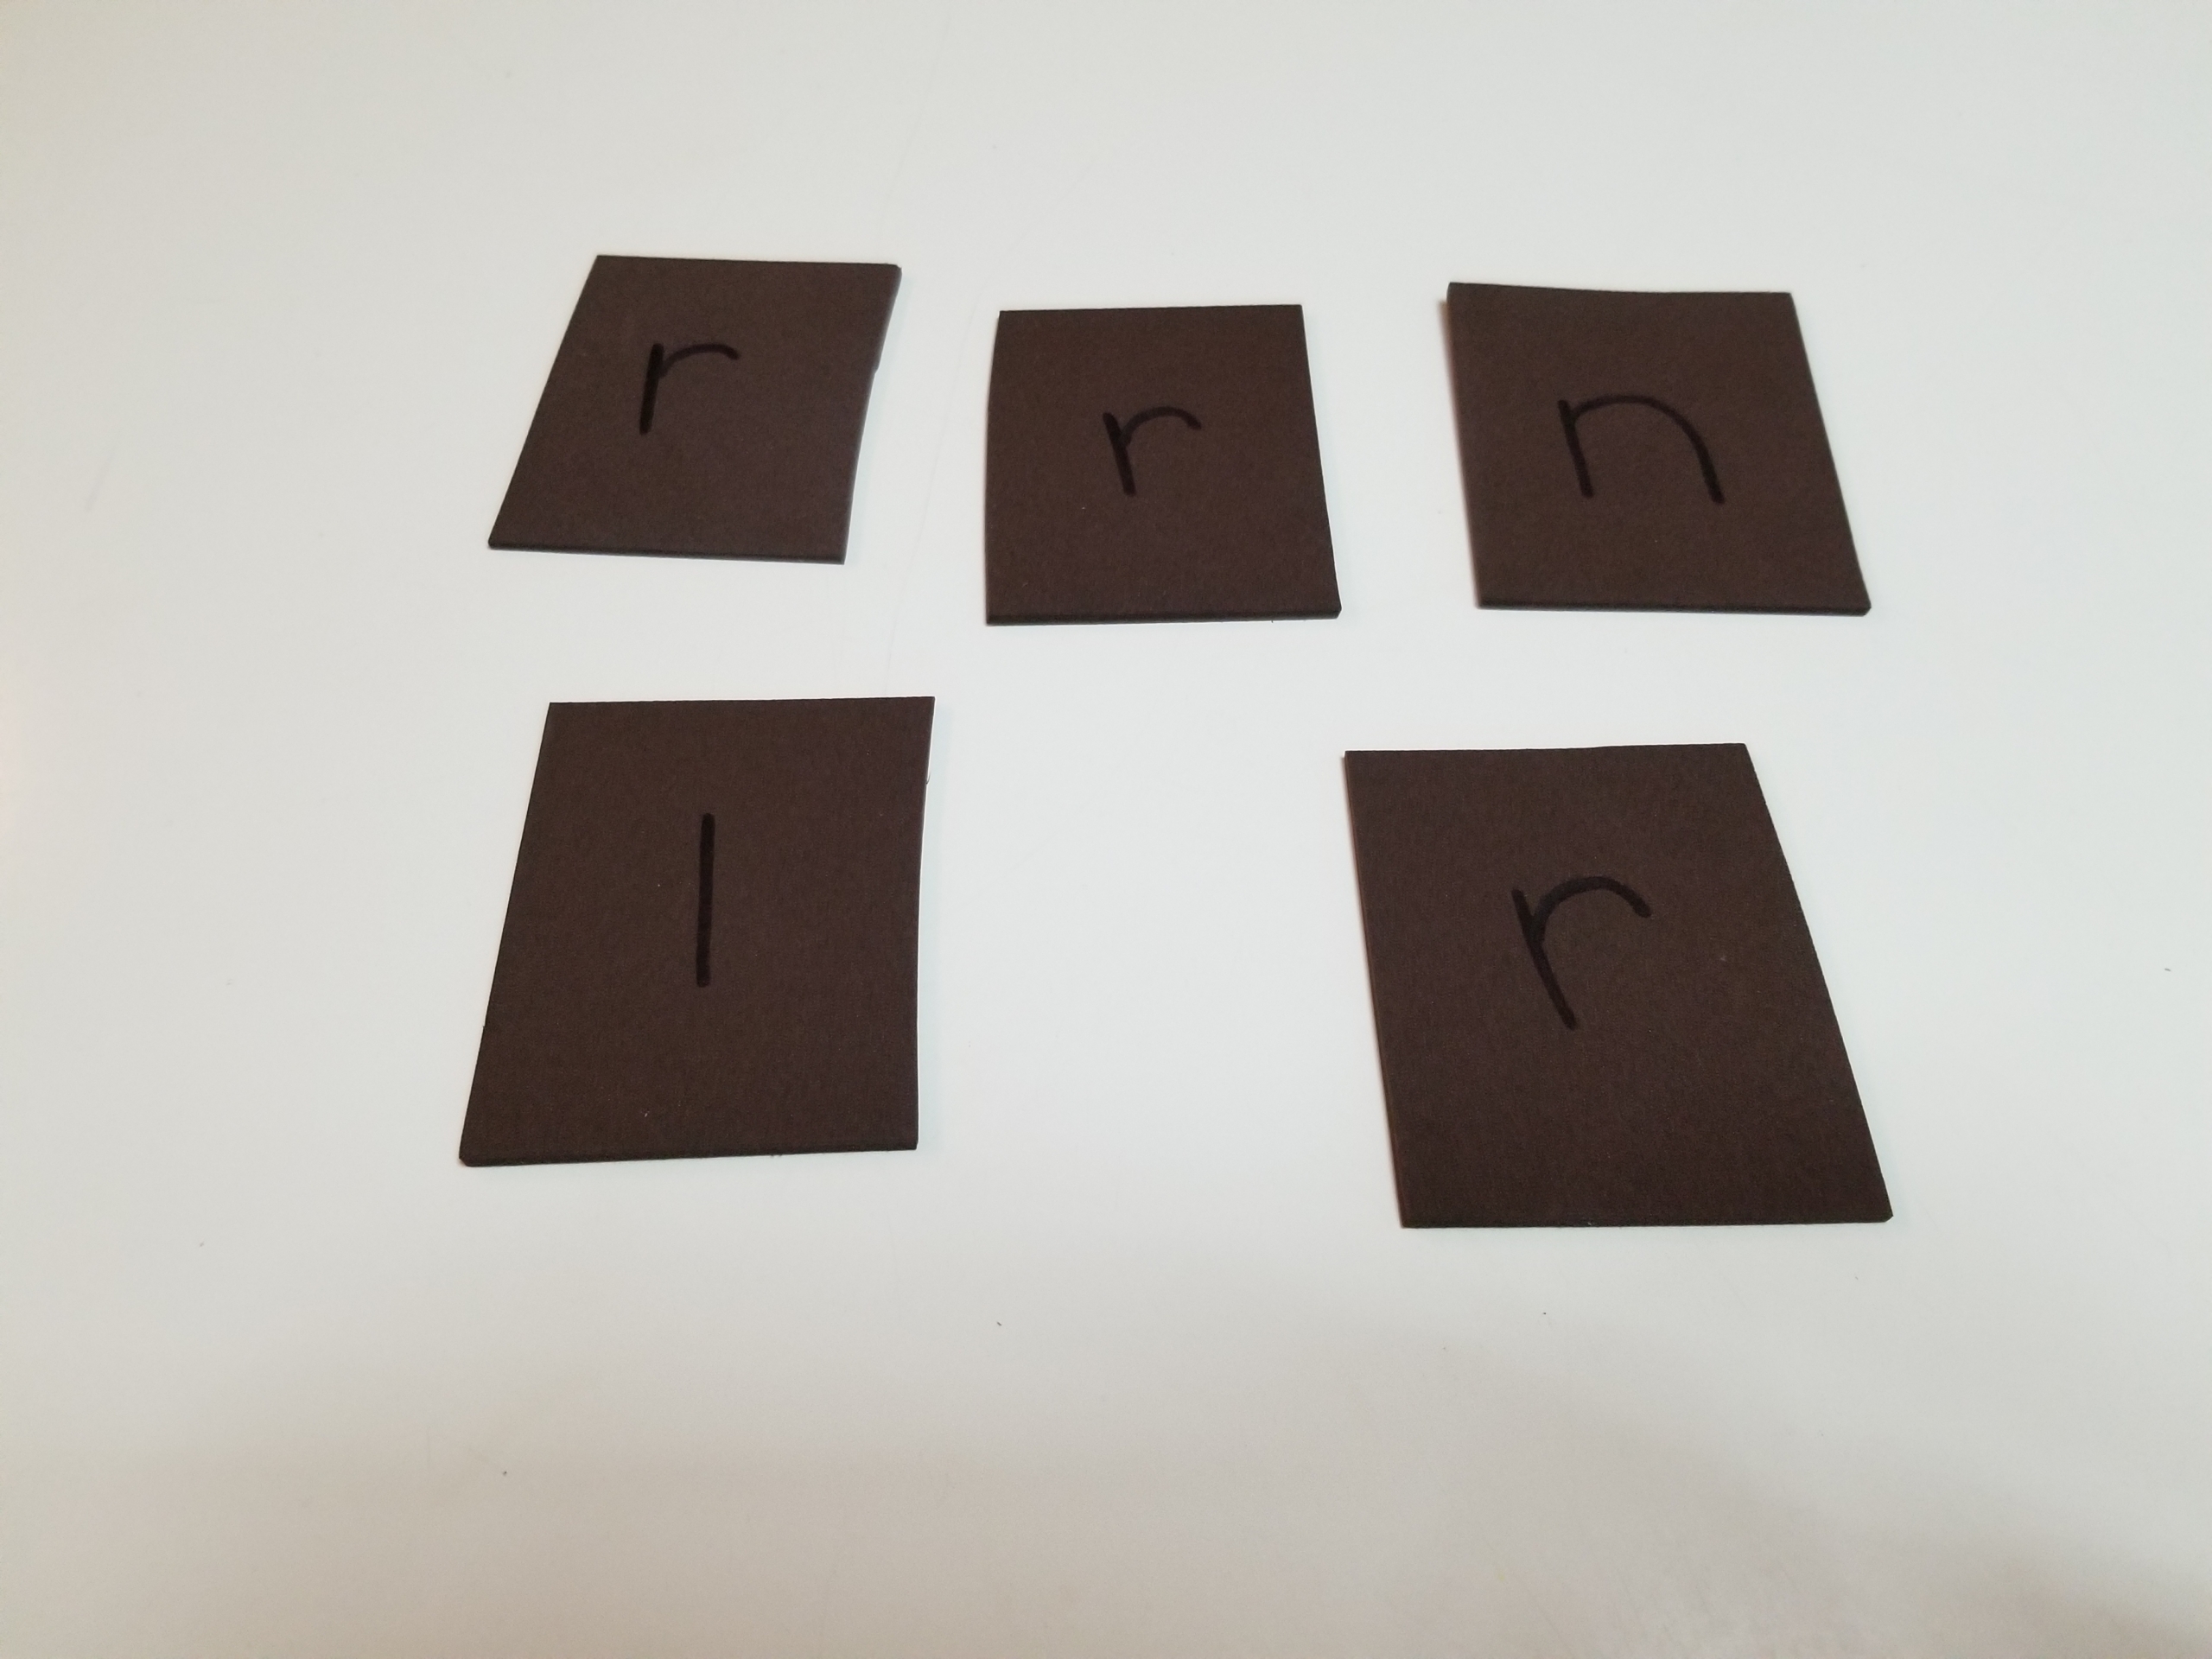 dark brown construction paper cut into squares with letters drawn on each square